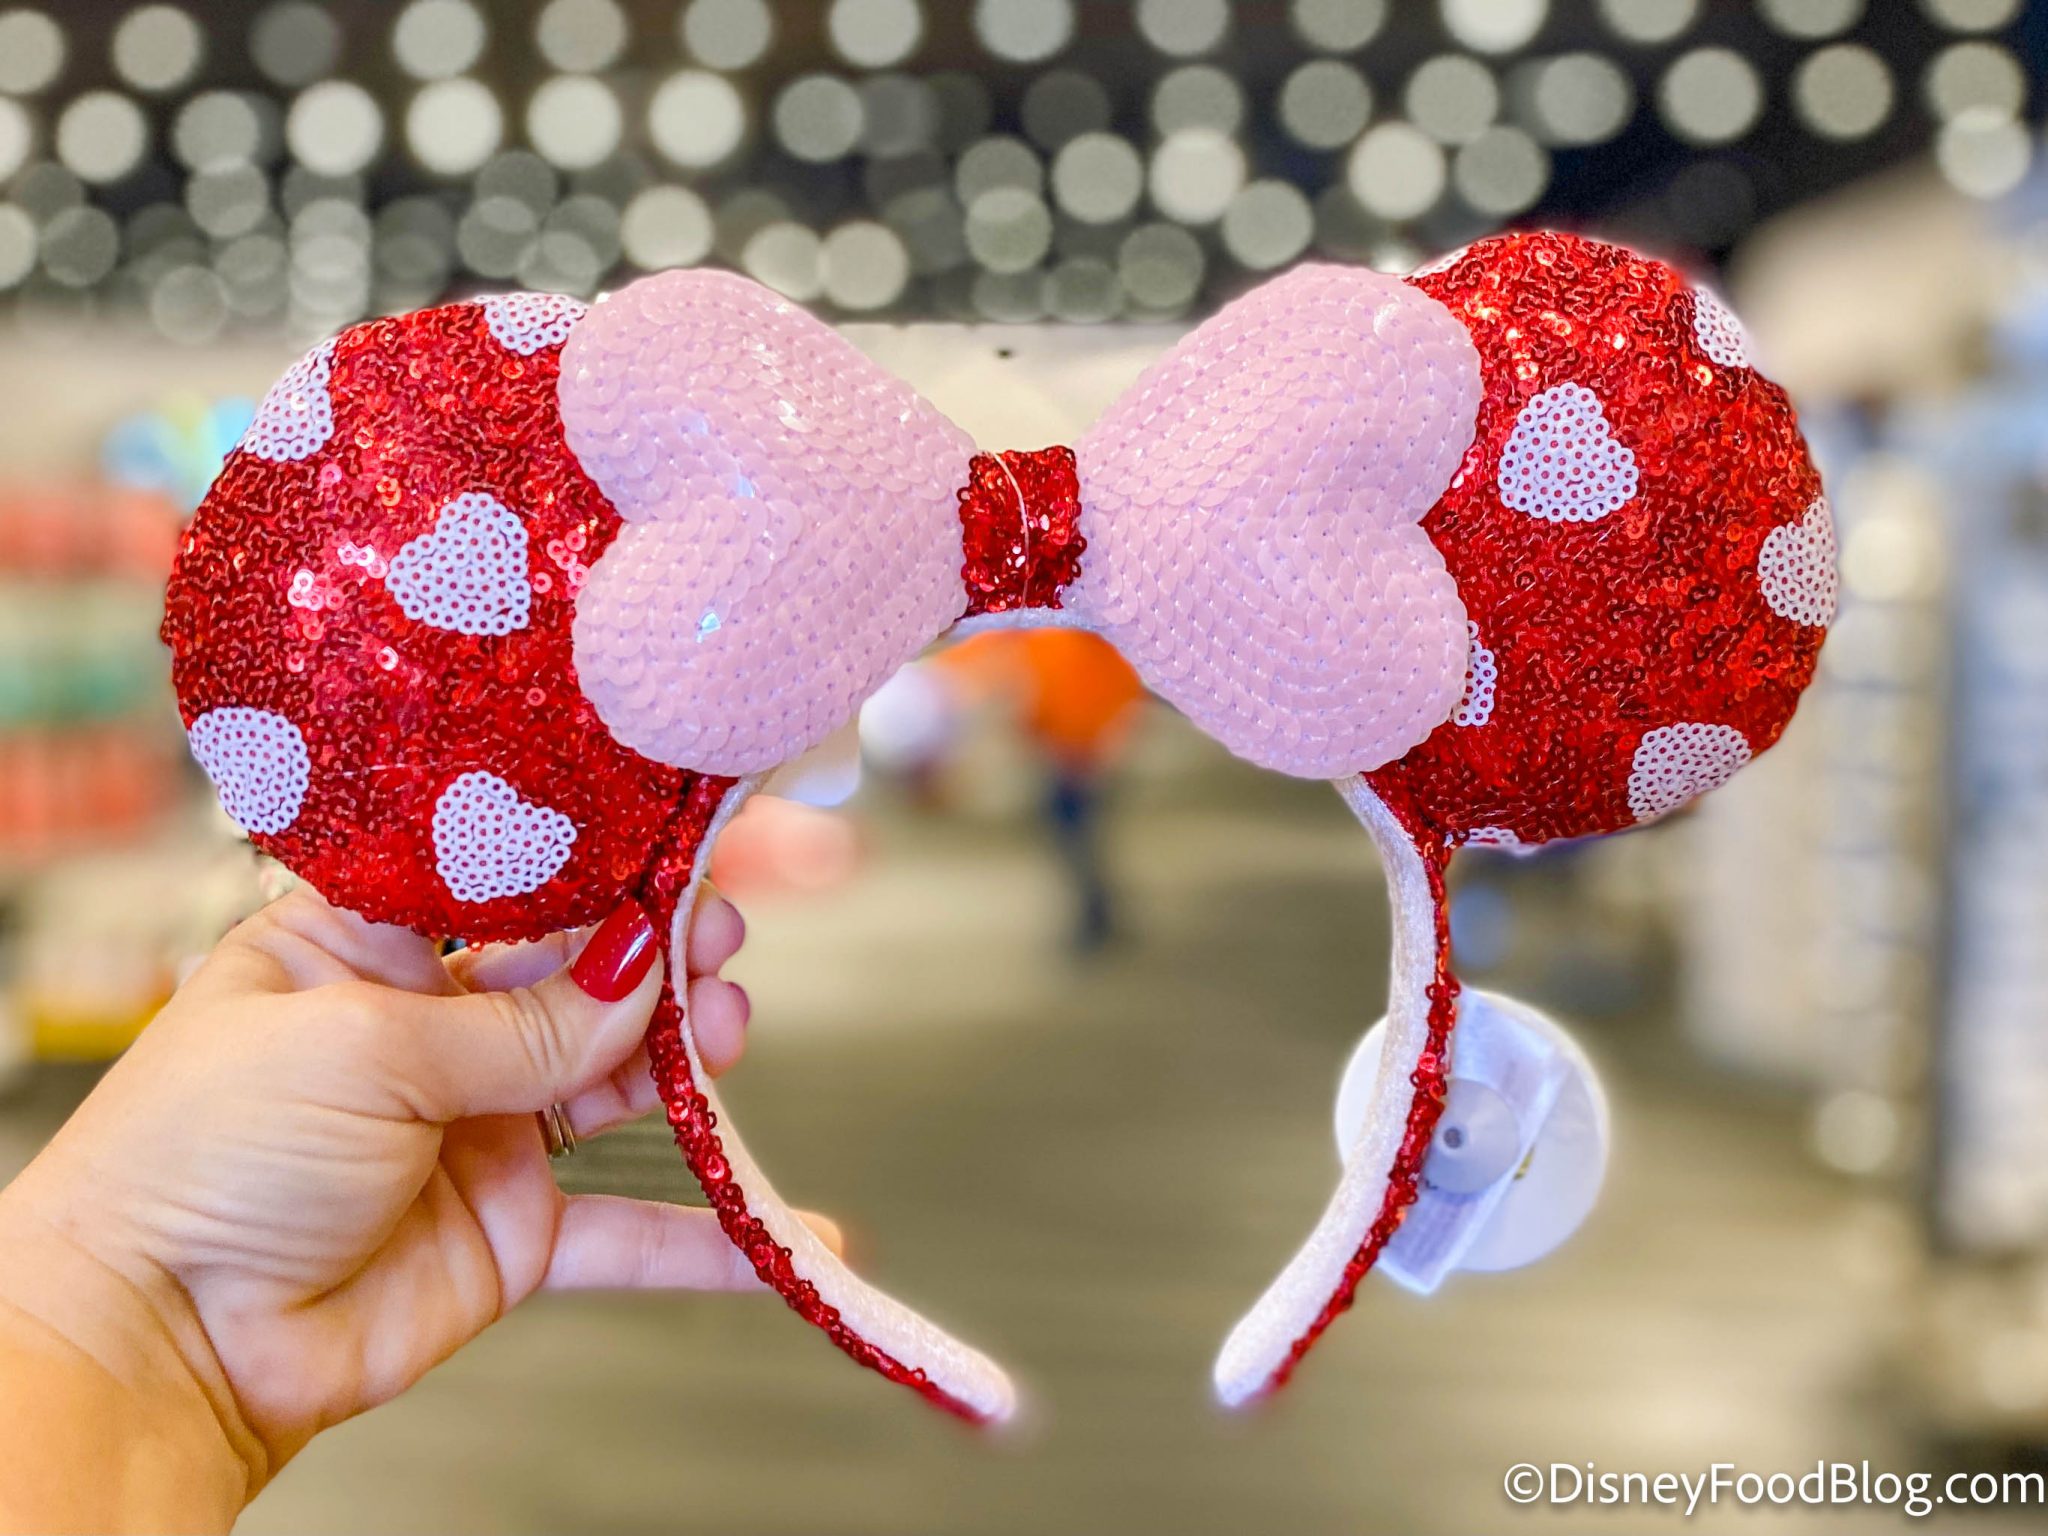 The New Valentine's Day Minnie Ears Have Officially Arrived in Disney